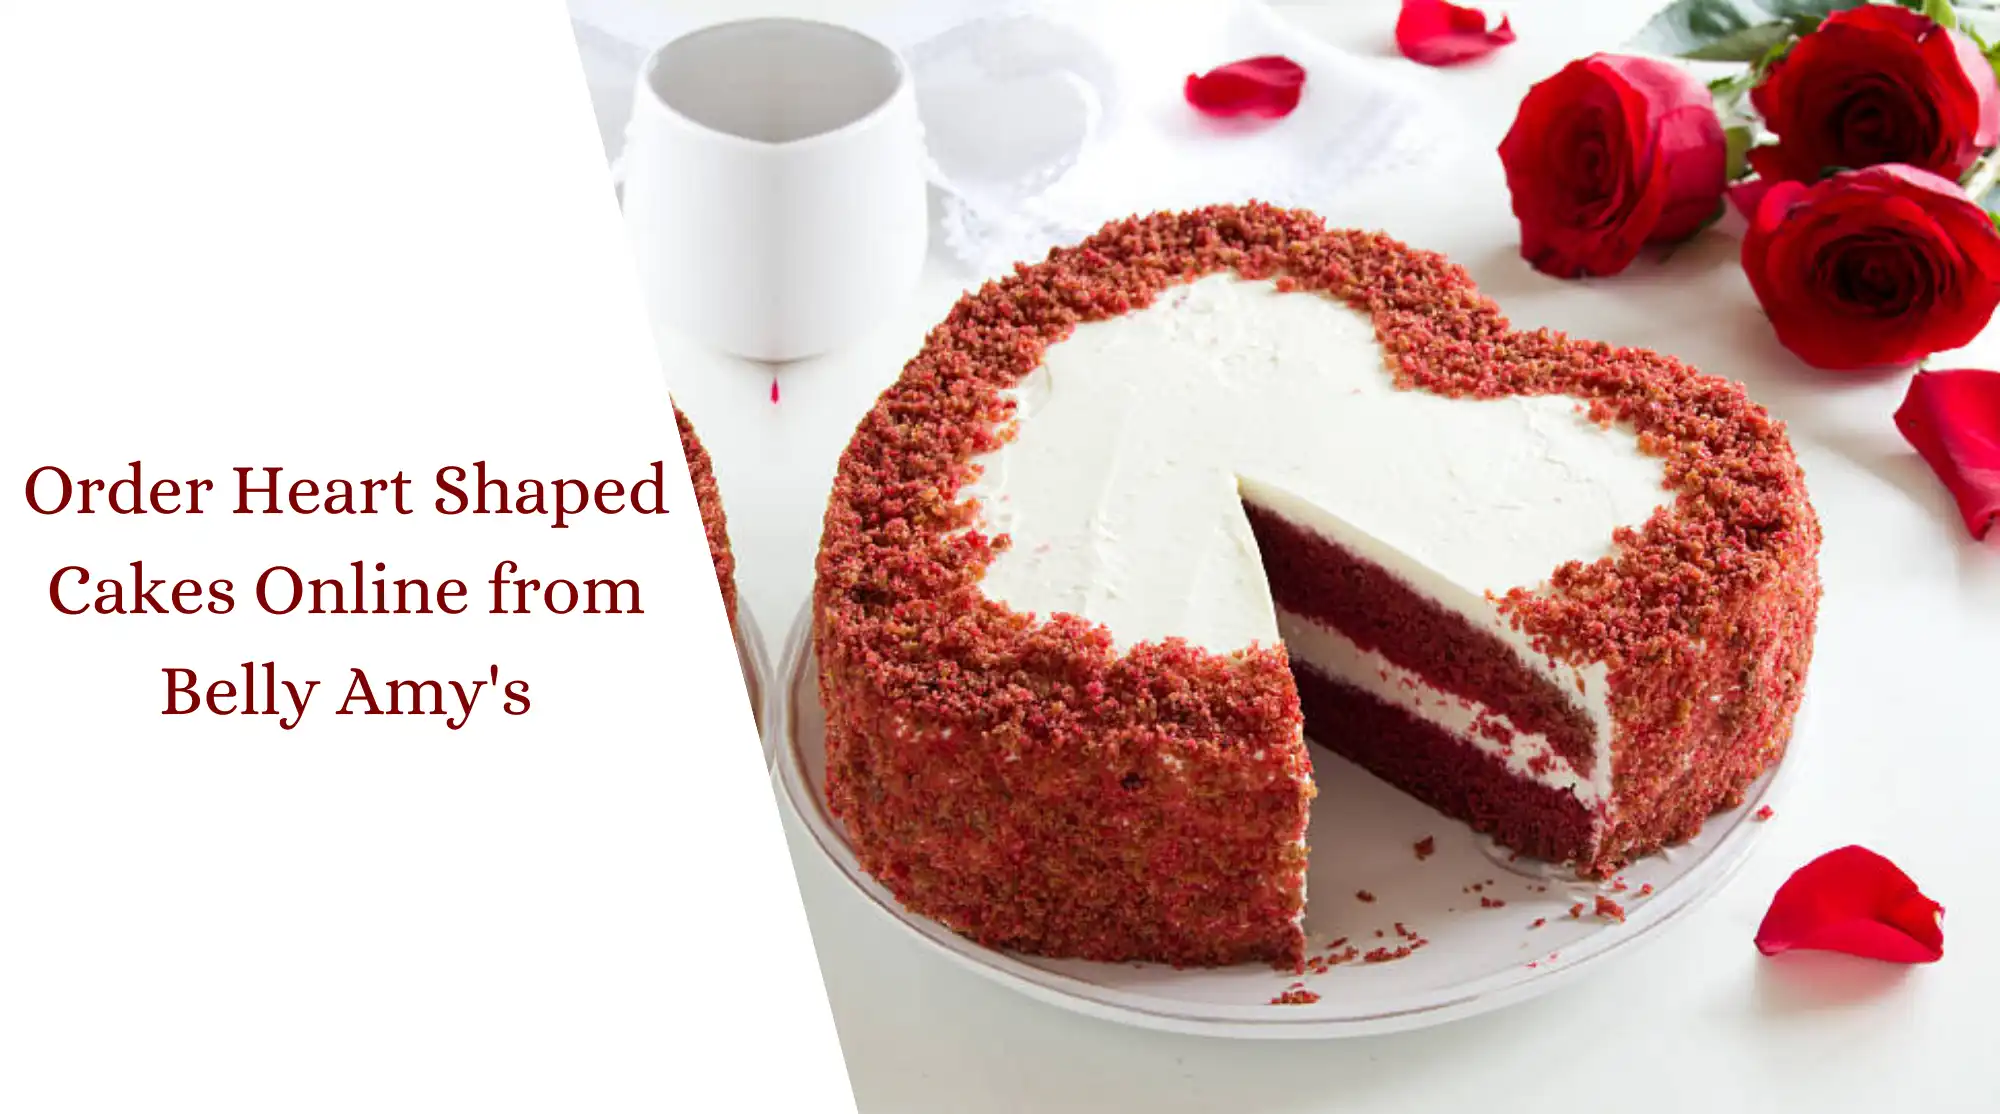 Order Heart Shaped Cakes Online from Belly Amy's